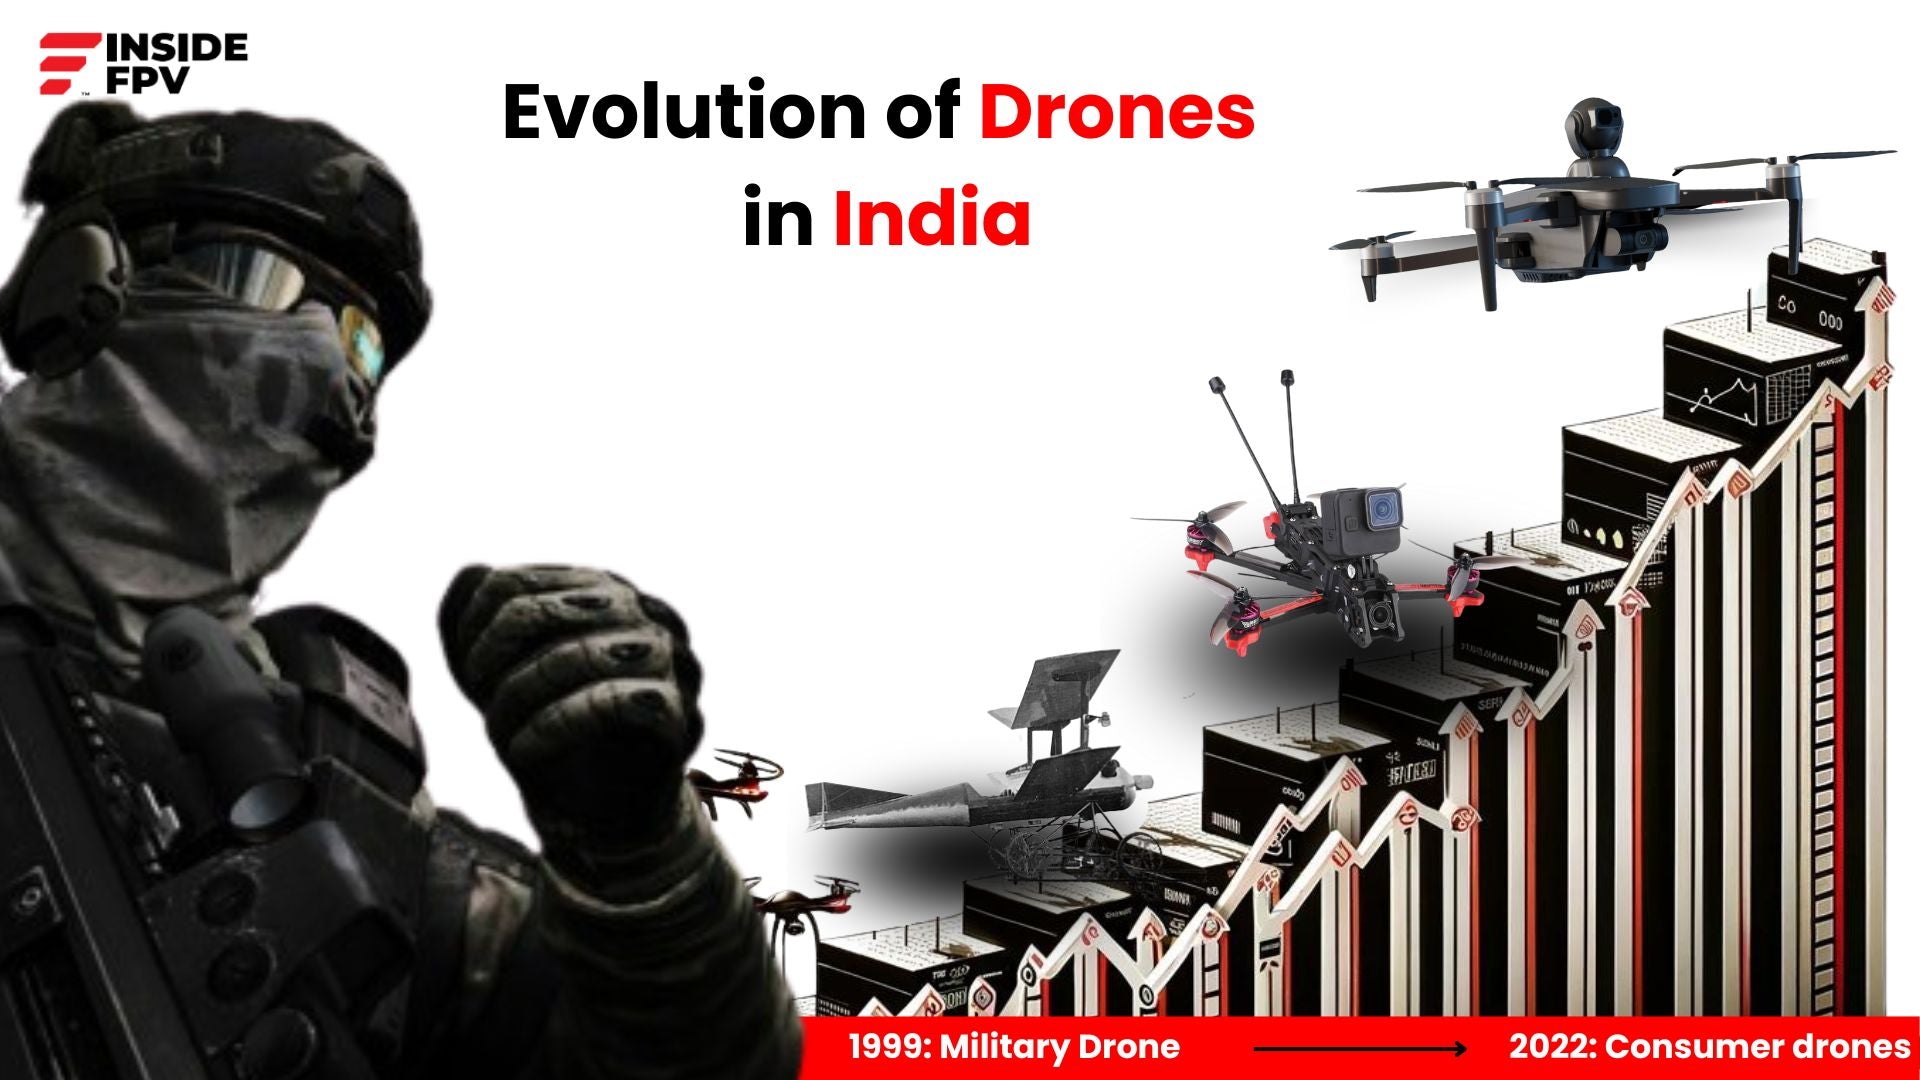 The Evolution of Drone Technology in the Indian Perspective